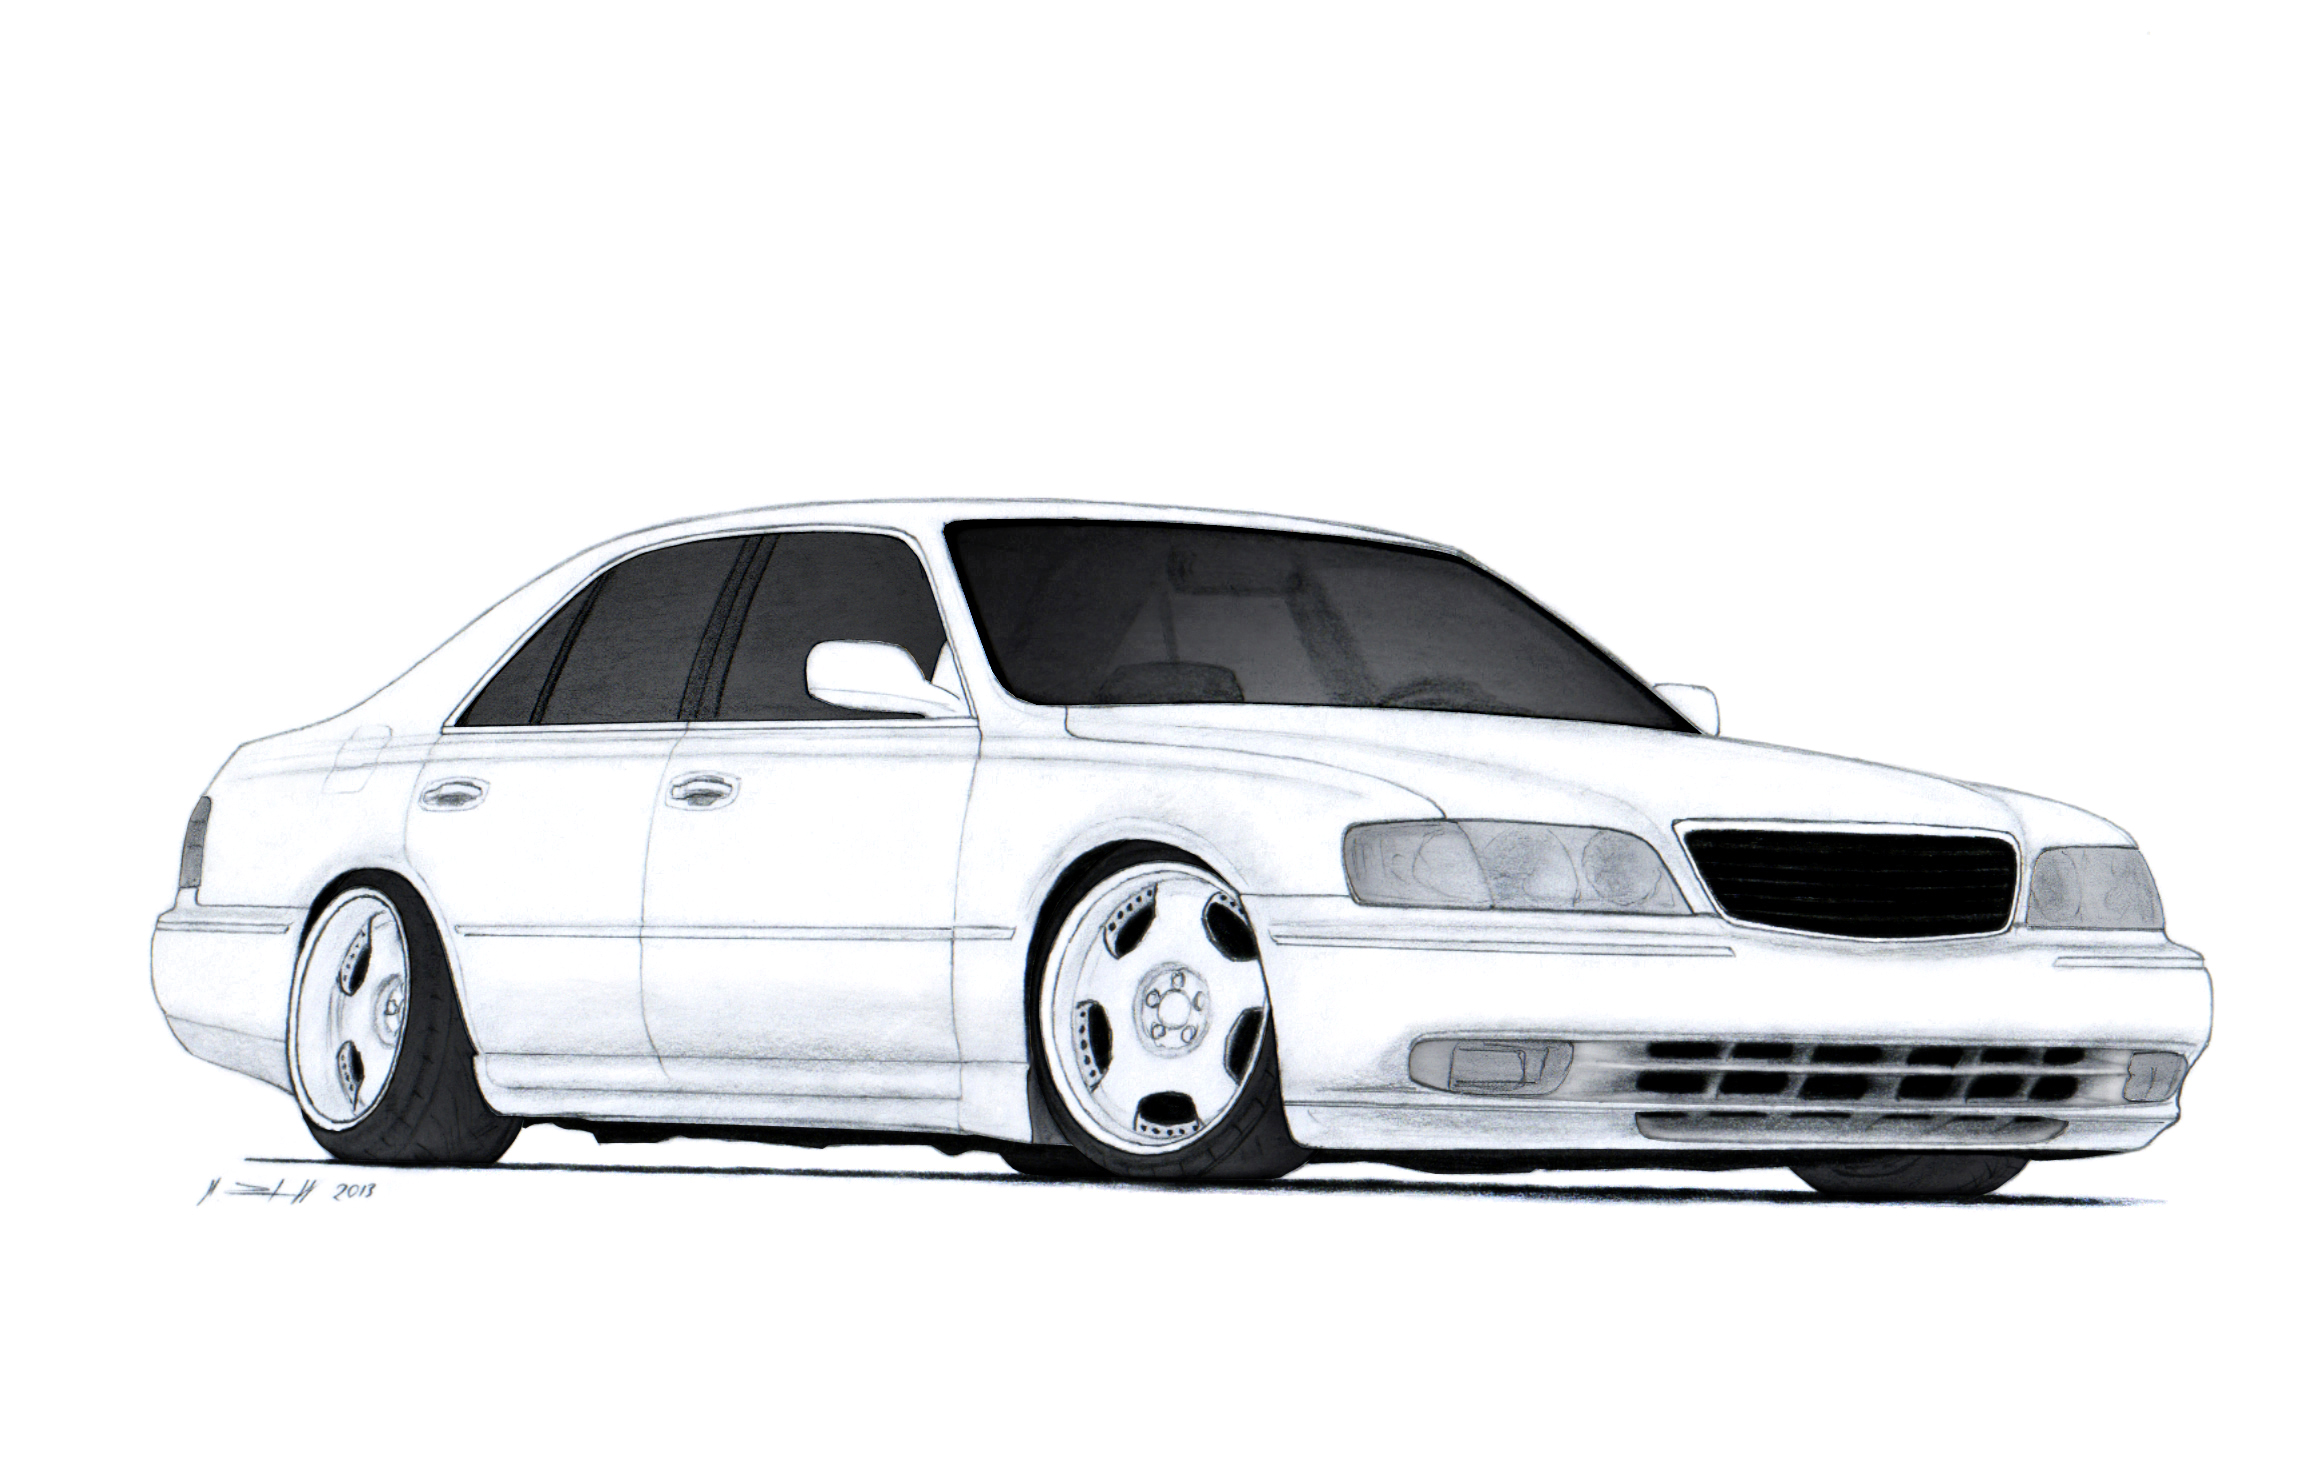 Infiniti Q45 Y33 Vip Style Car Drawing by Vertualissimo on DeviantArt